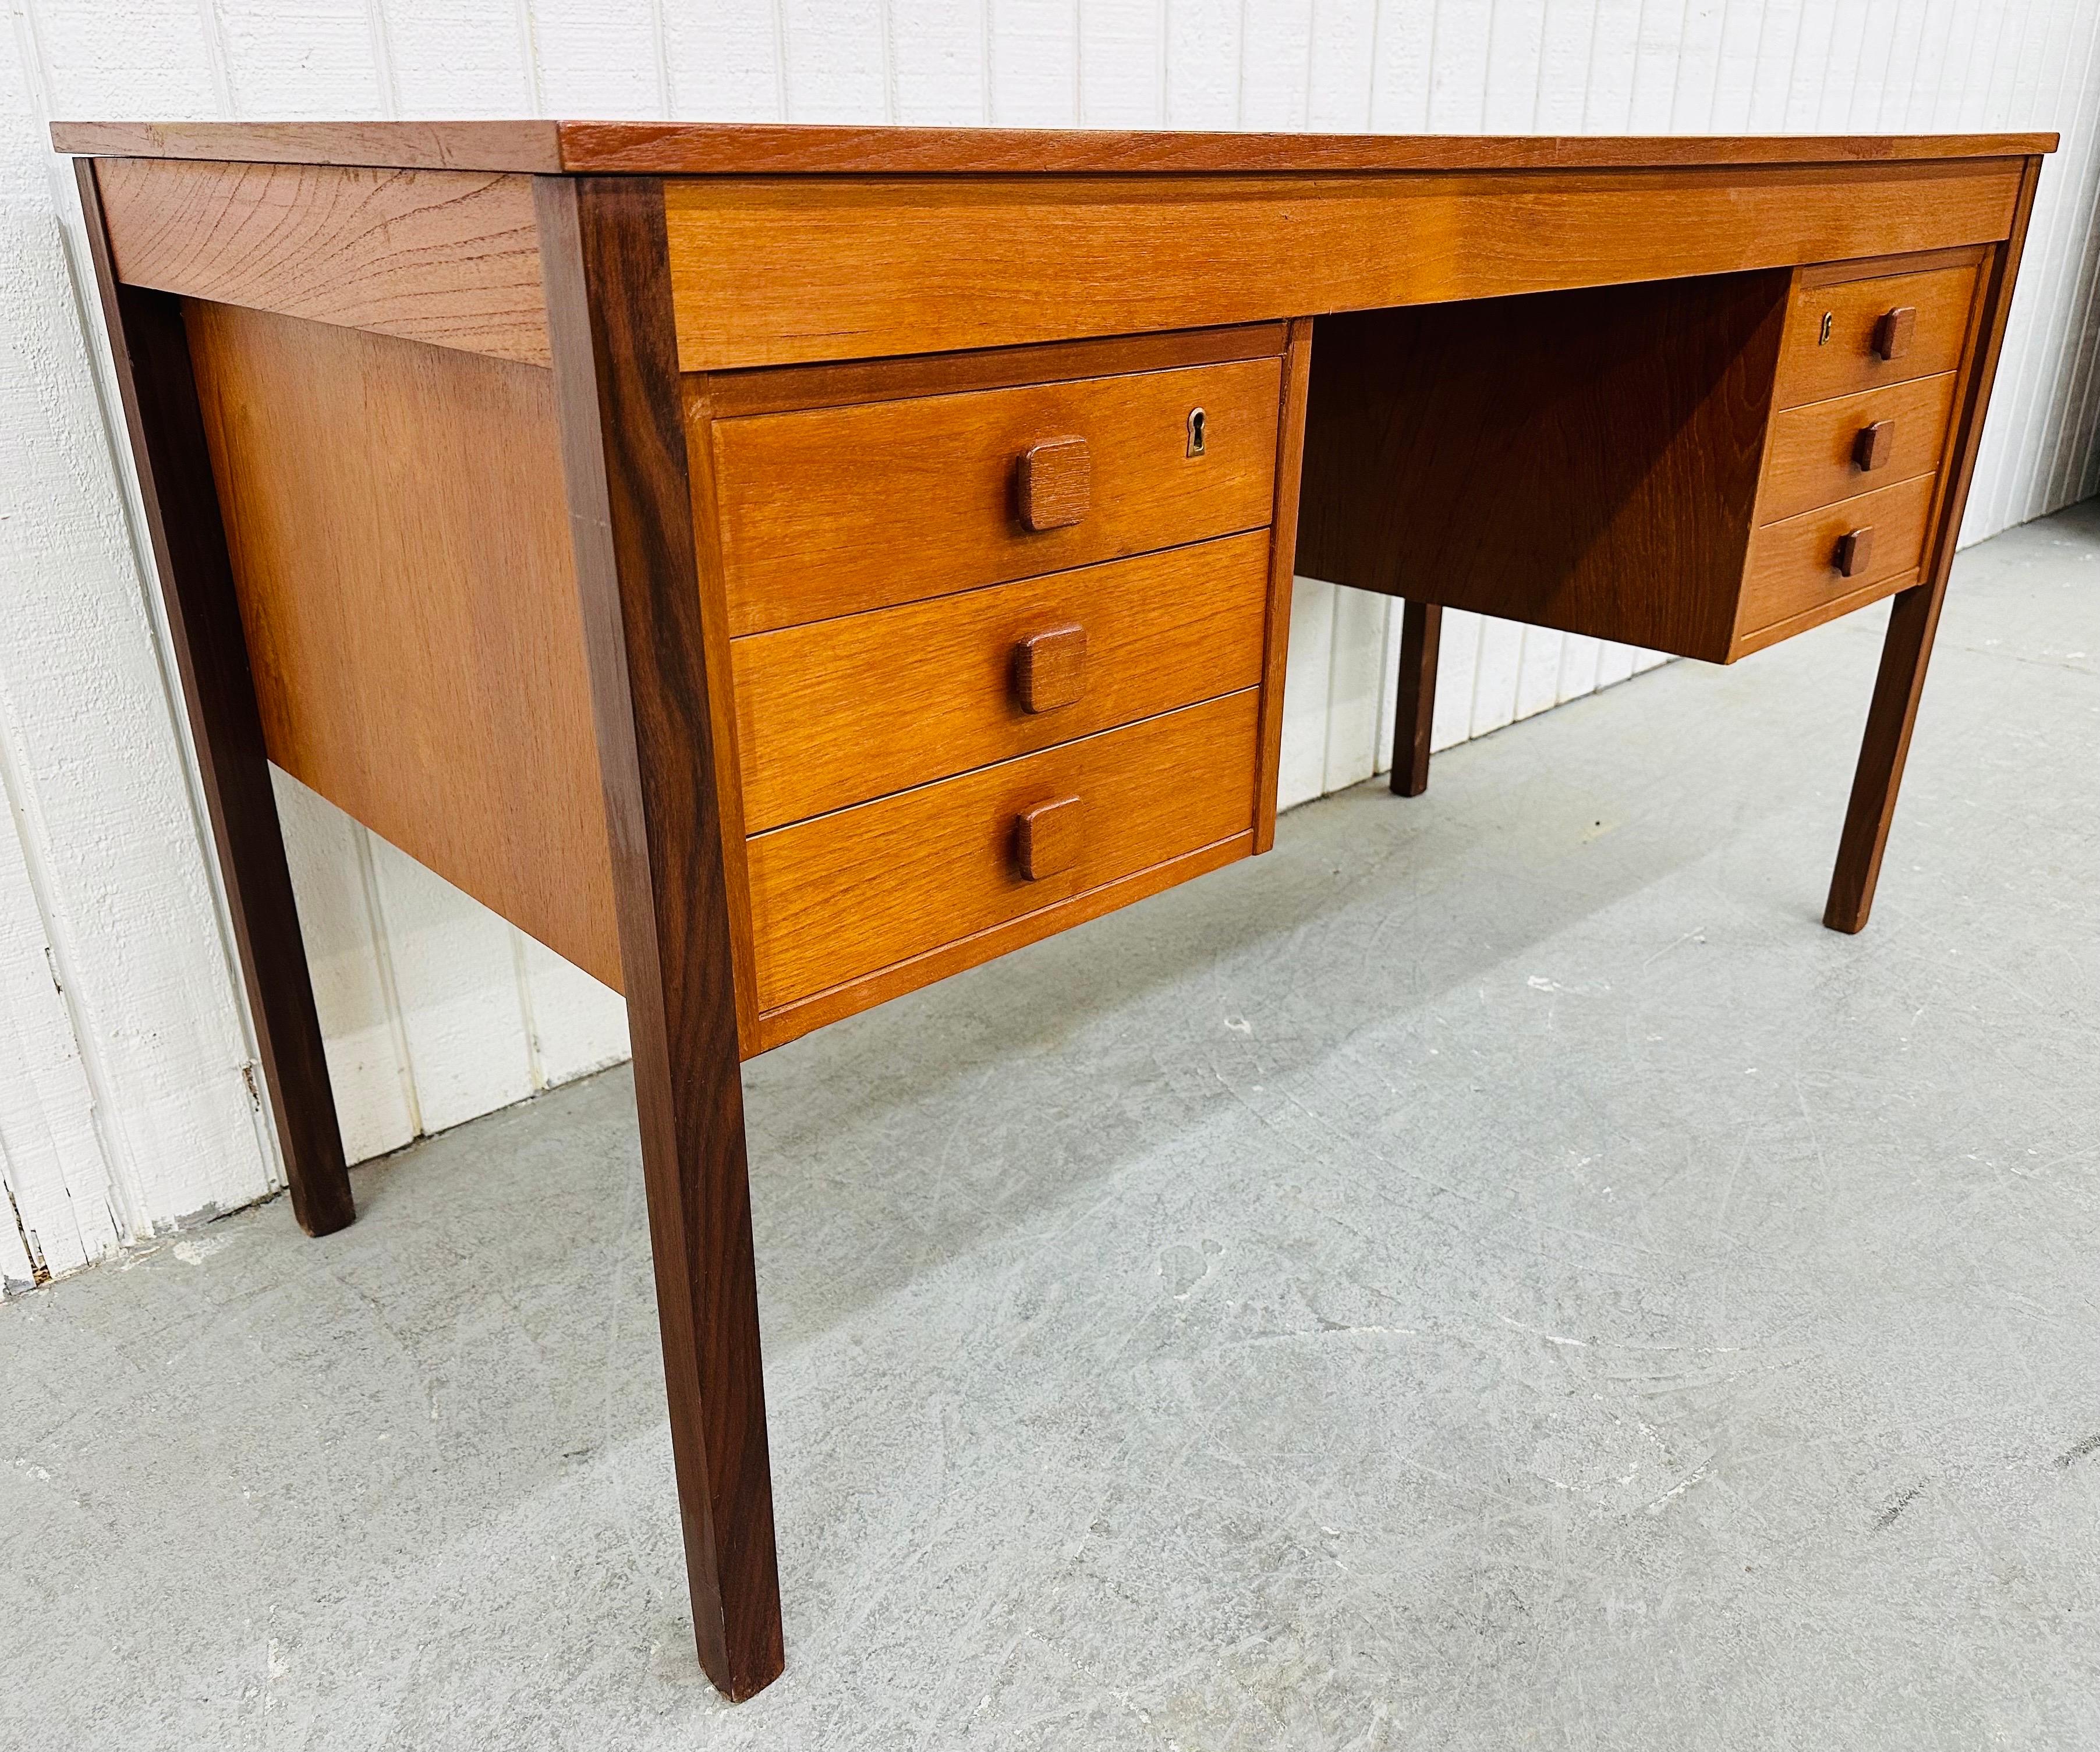 This listing is for a Vintage Danish Modern Teak Writing Desk. Featuring a straight line design, rectangular top, six drawers with wooden pulls for storage, modern legs, and a finished backside. This is an exceptional combination of quality and